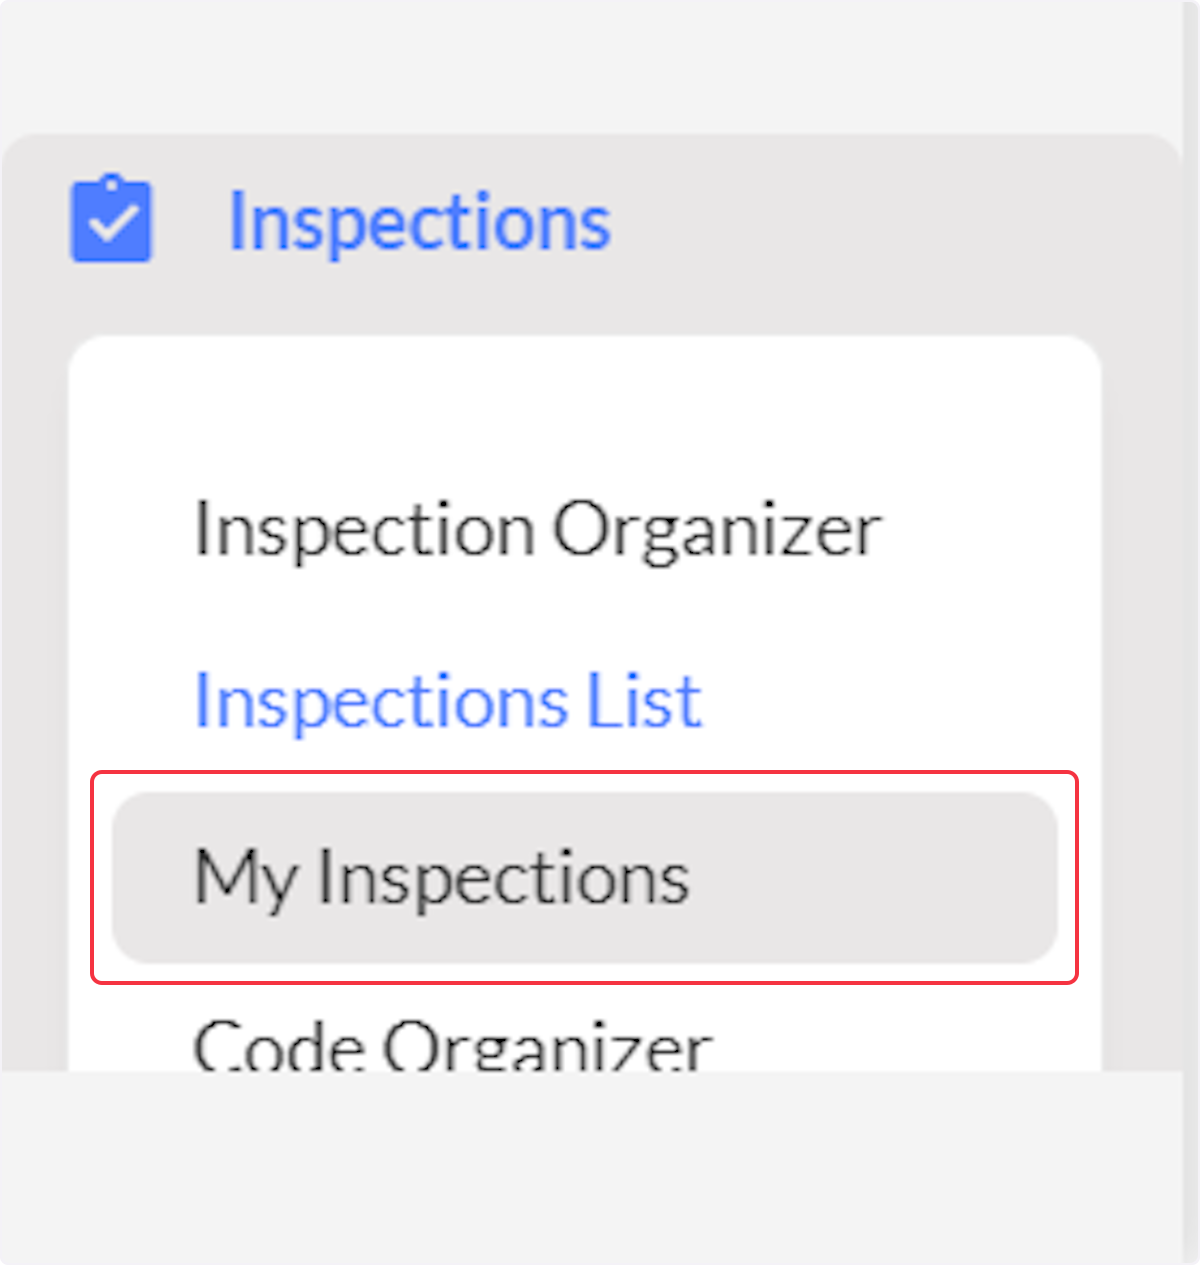 Click on My Inspections.